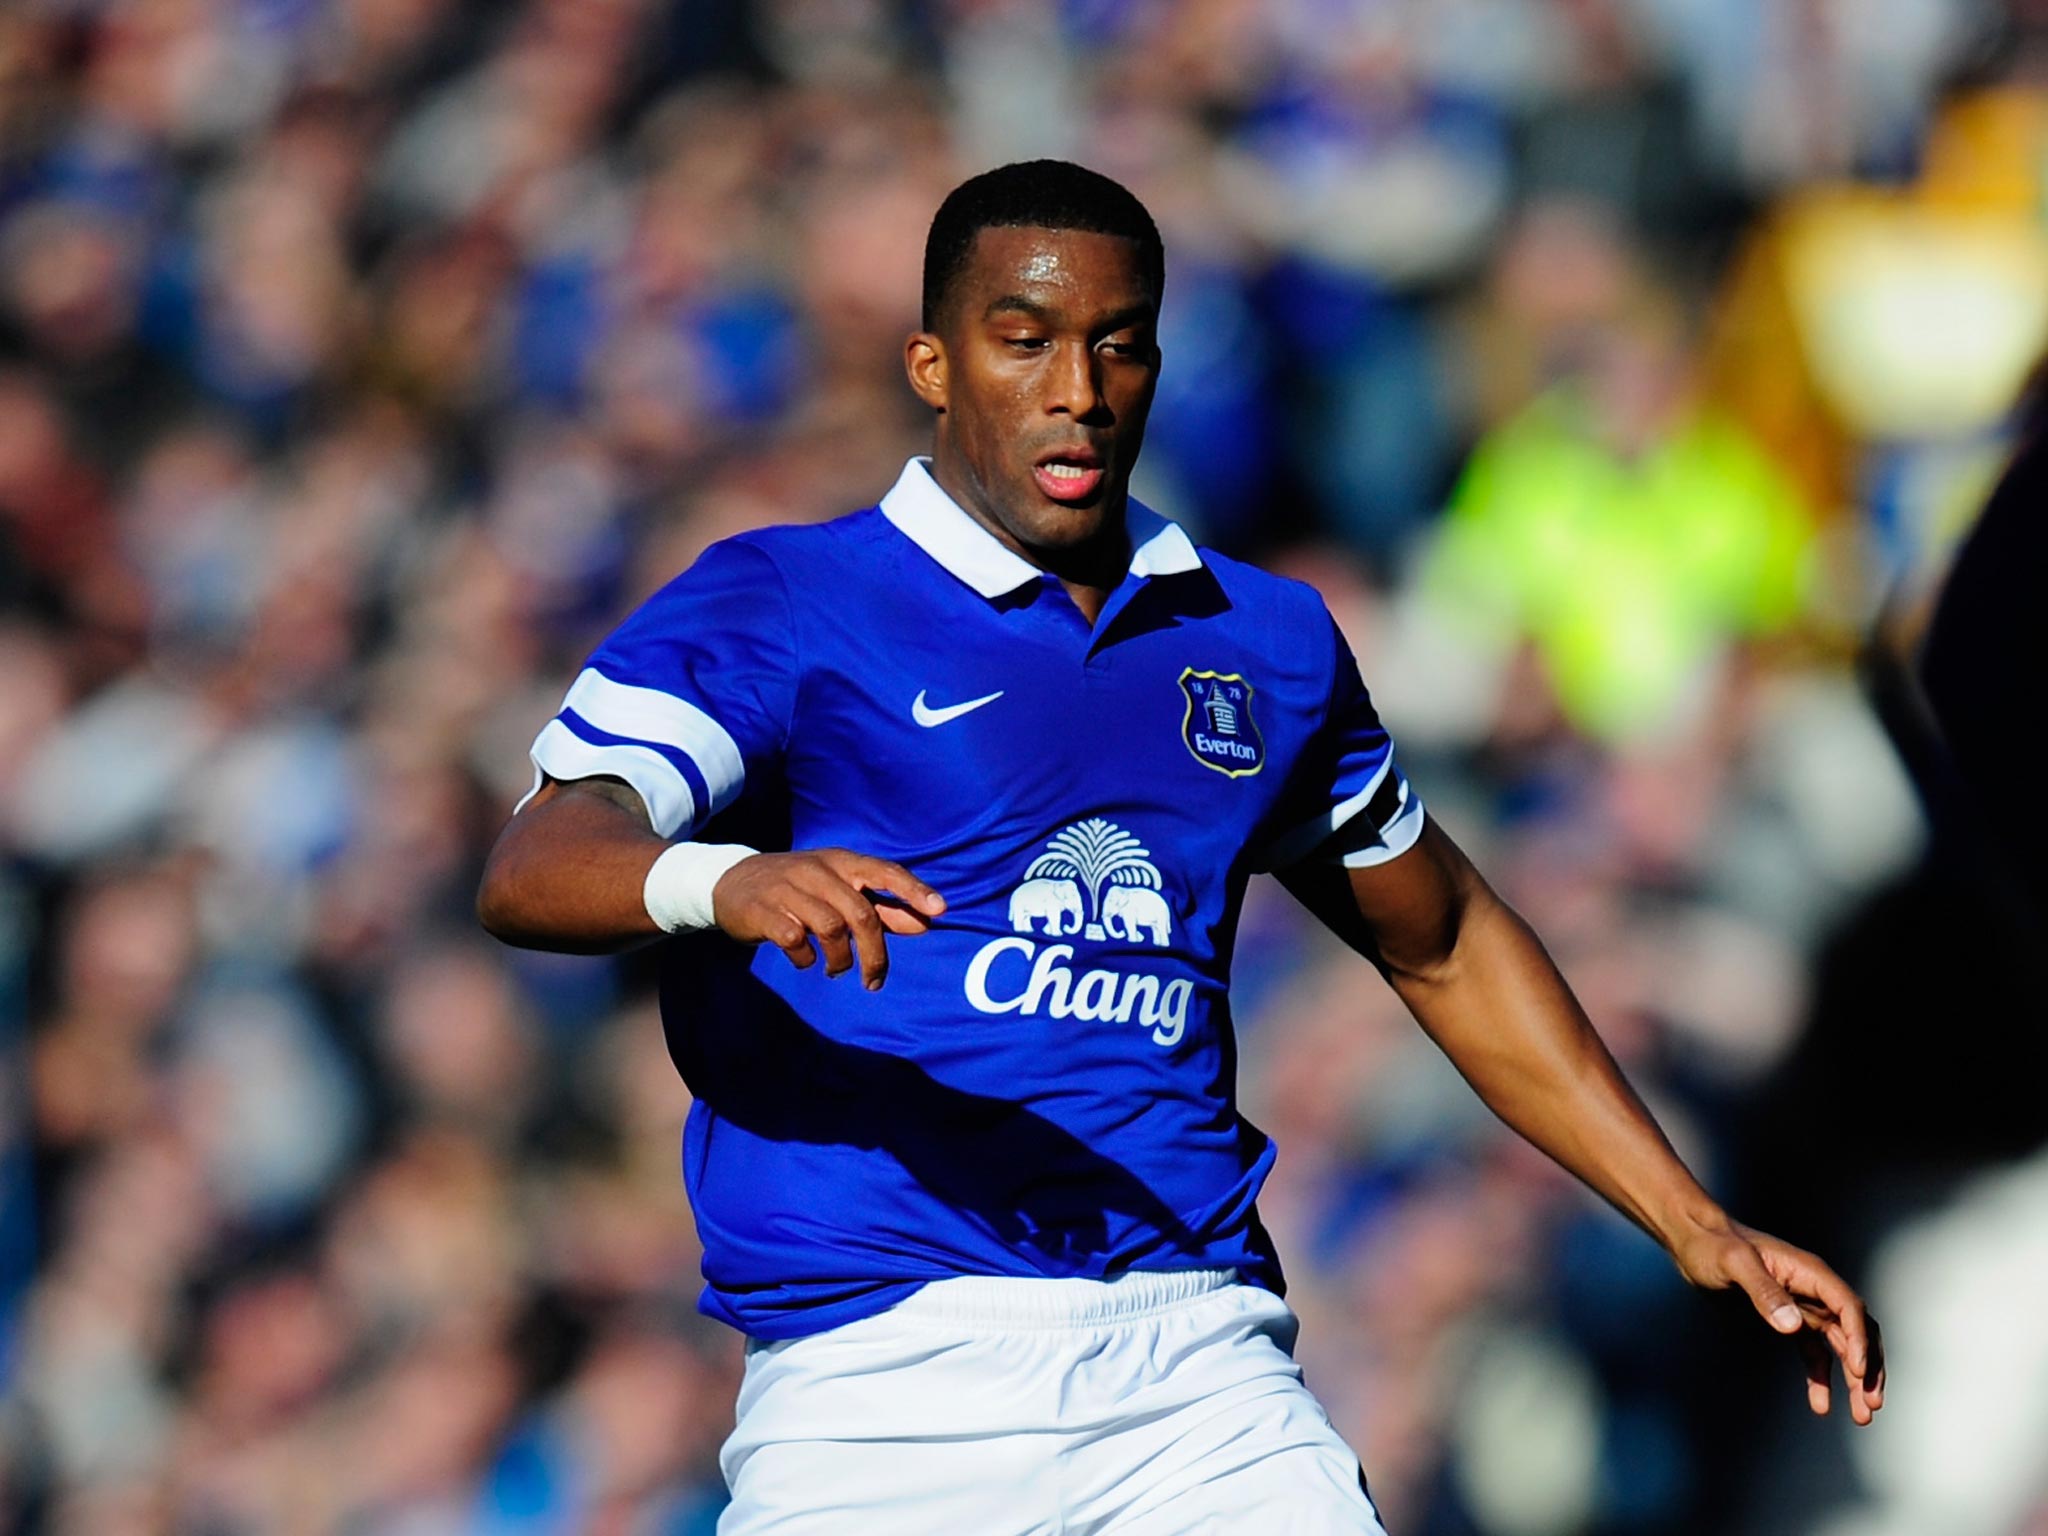 Everton defender Syvain Distin suffered a hamstring injury in the 2-0 victory over Manchester United